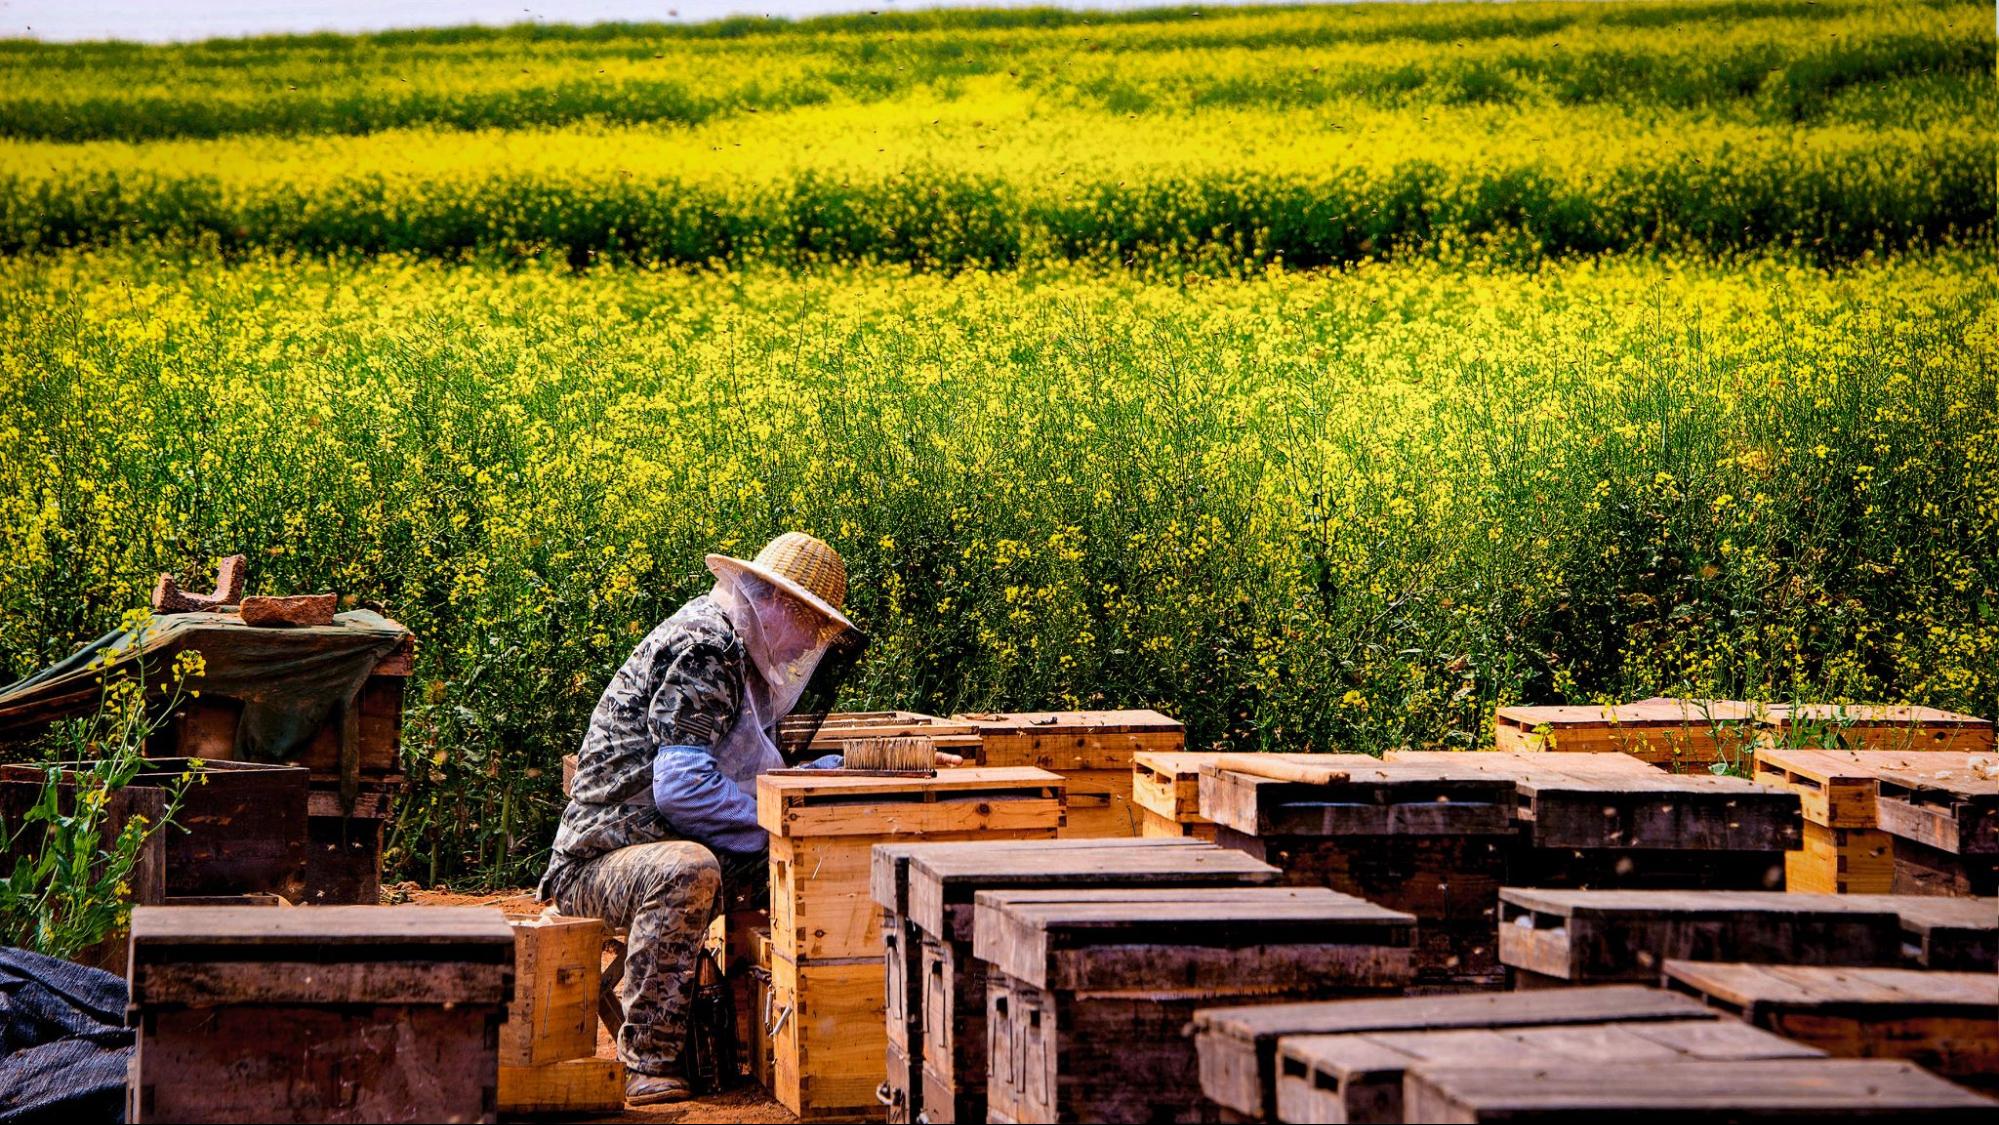 beekeeper inspecting hives in yellow rapeseed field